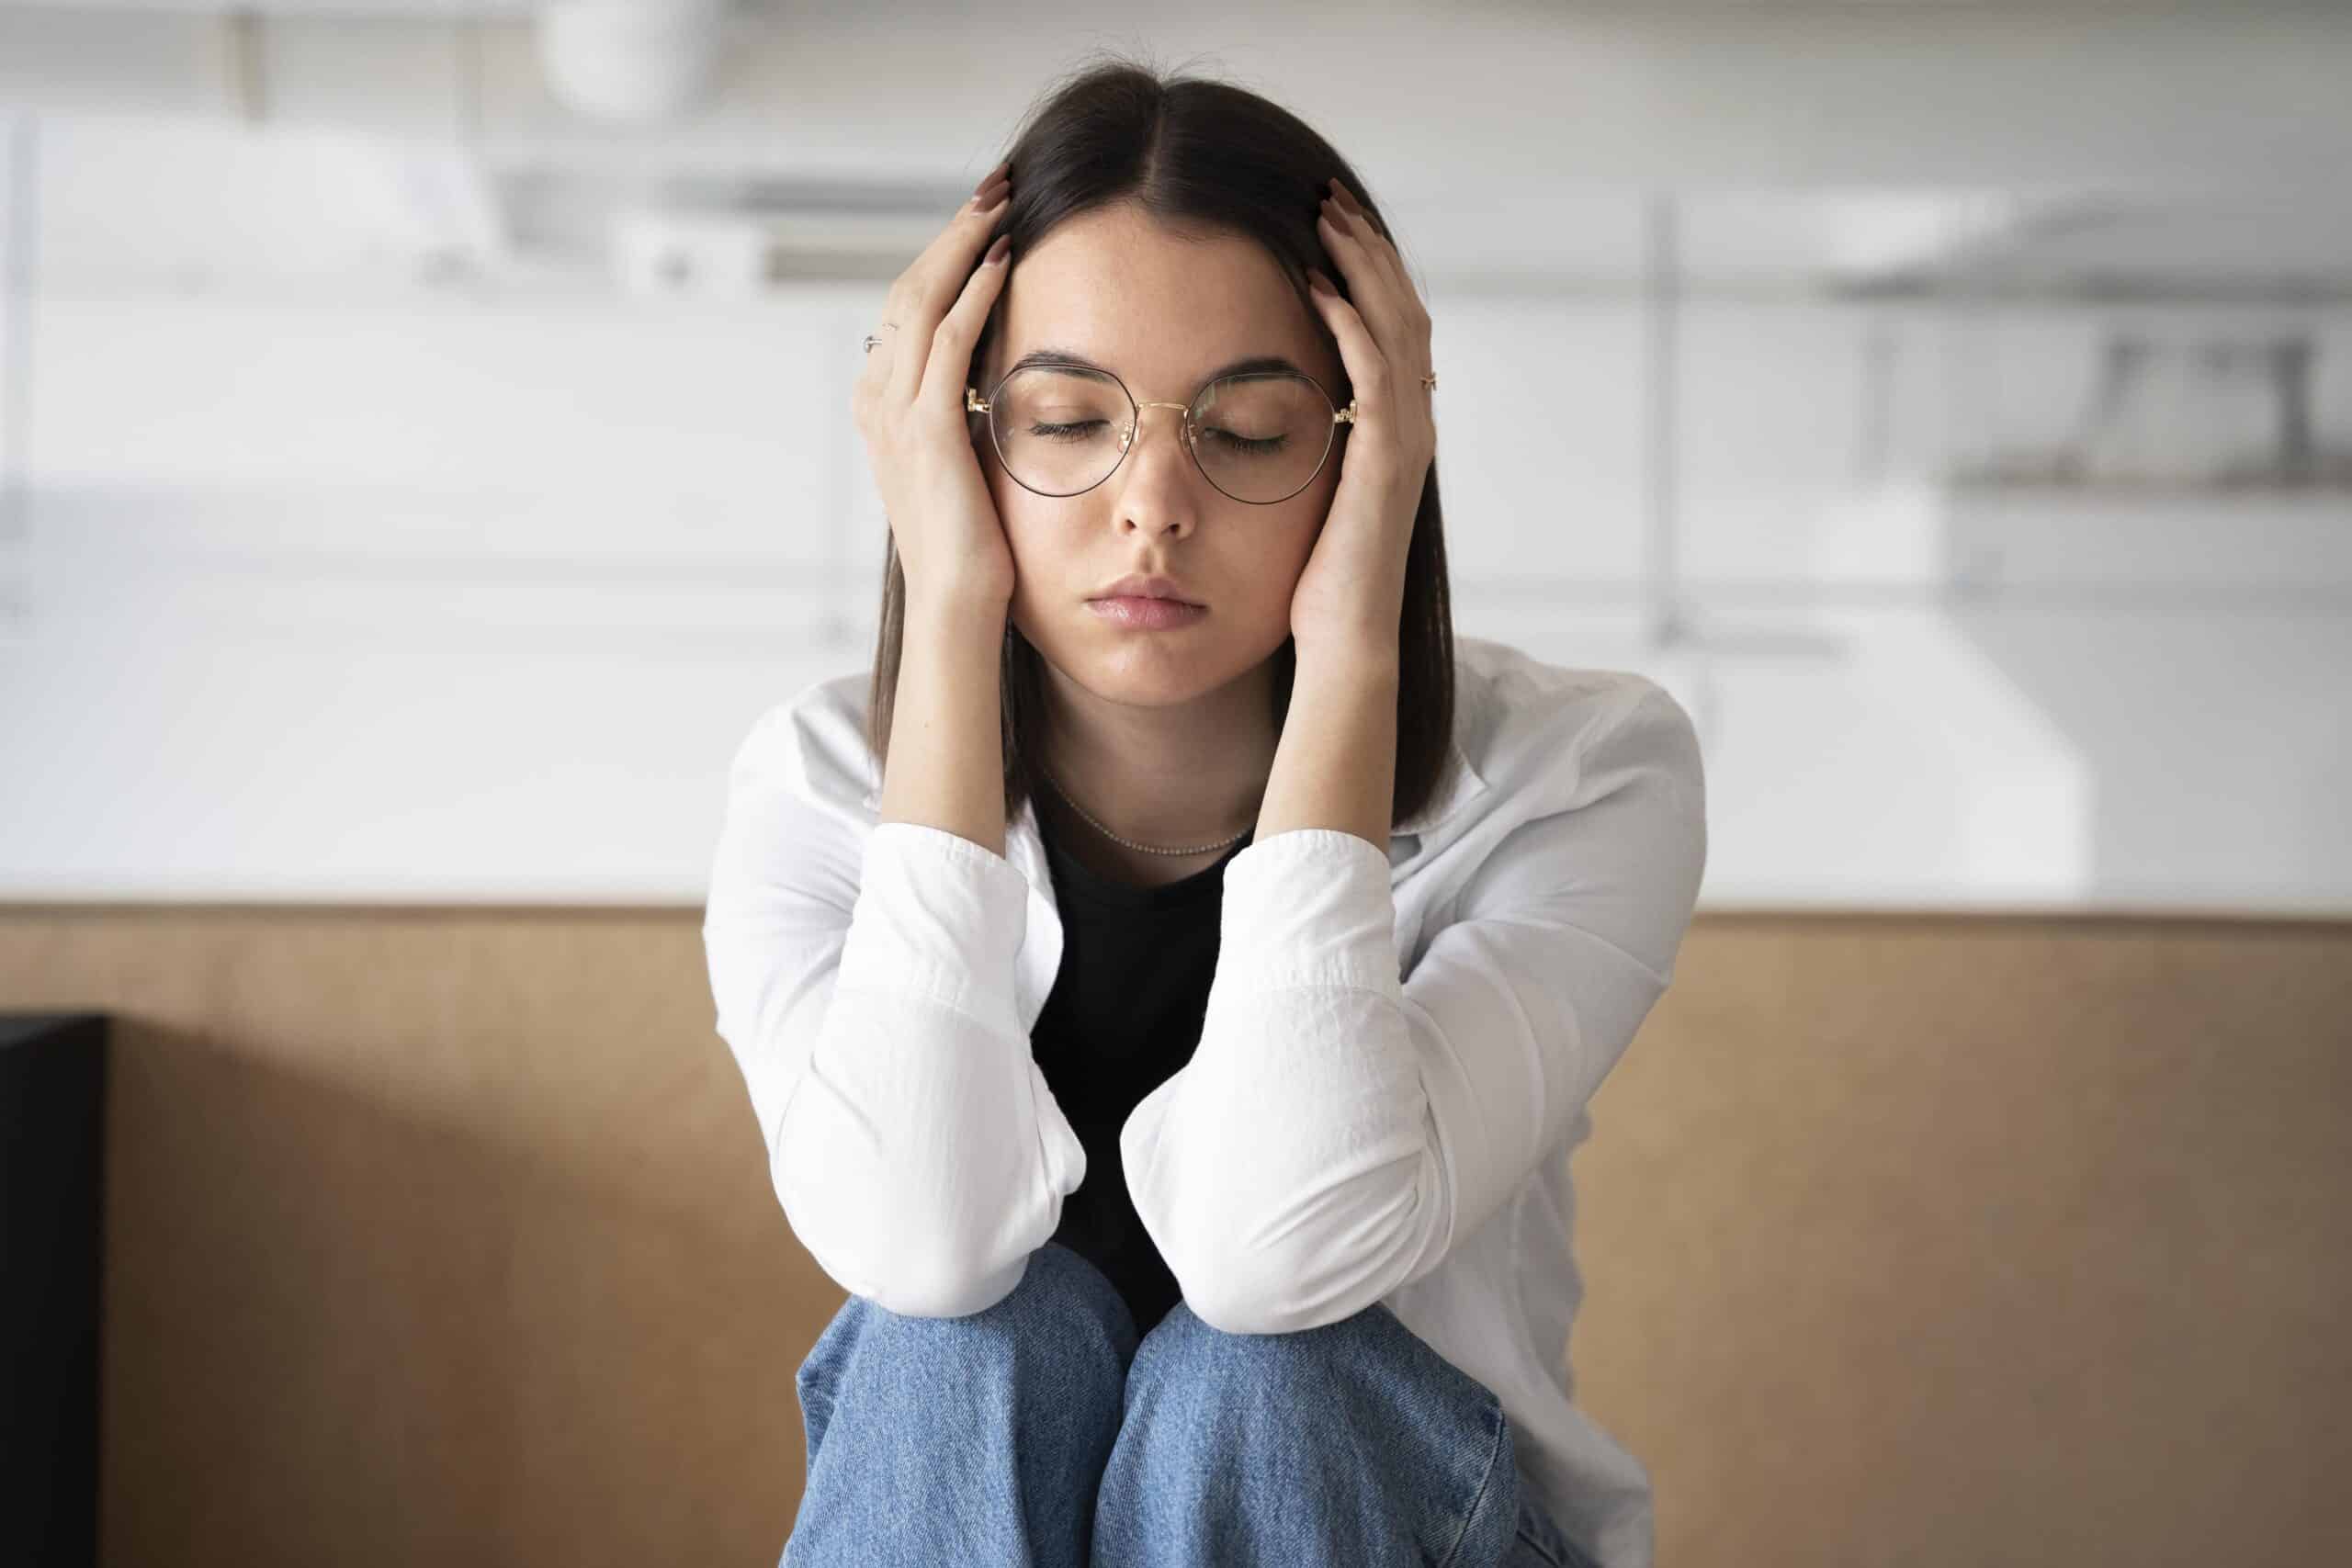 Depression tends to affect women in the US.